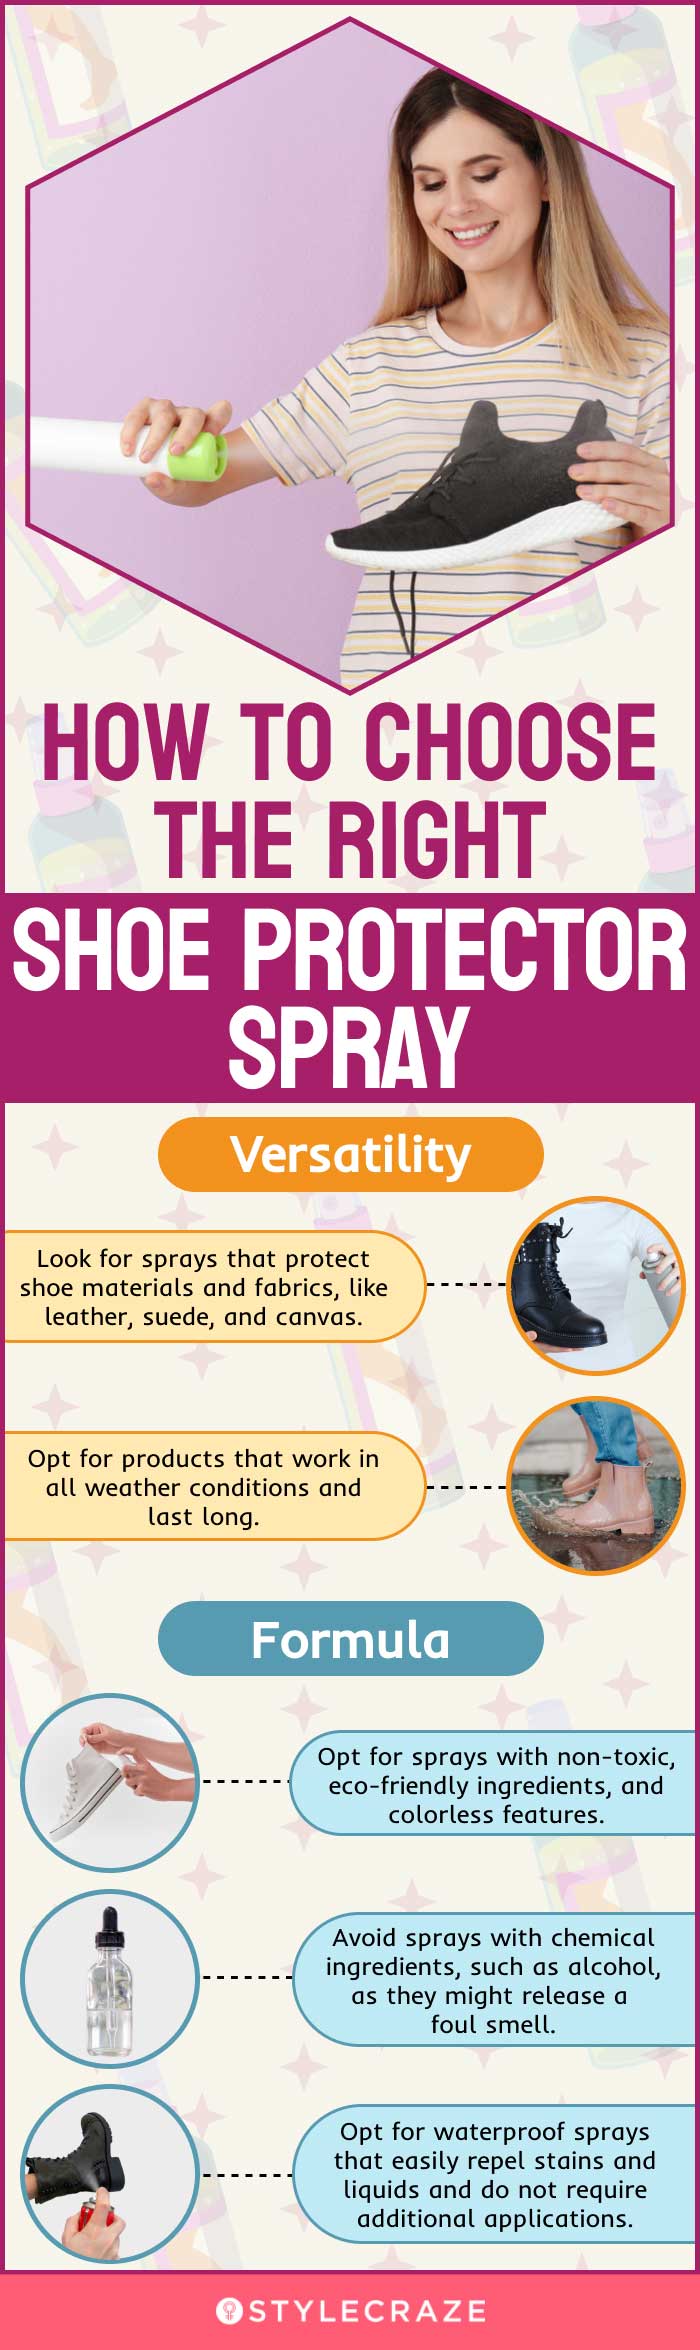 How To Choose The Right Shoe Protector Spray (infographic)